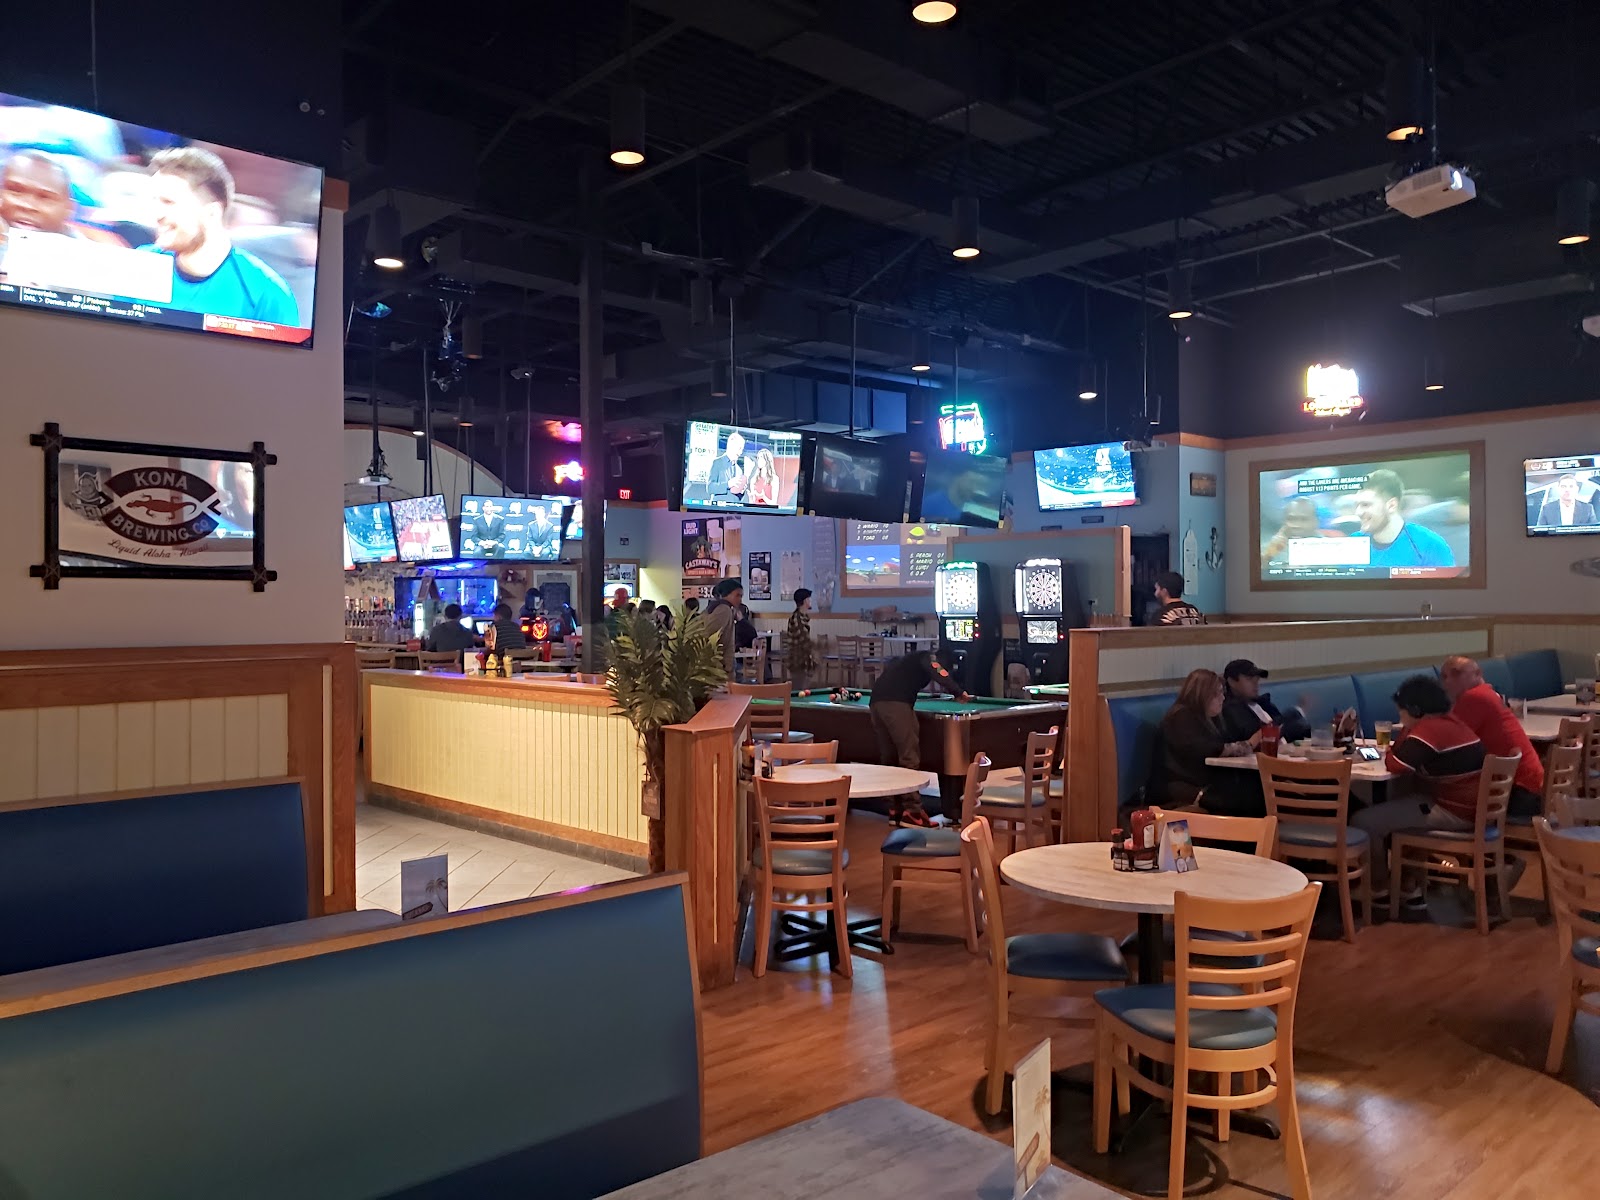 Tastes Of Orlando: Castaway's Sports Bar and Grill